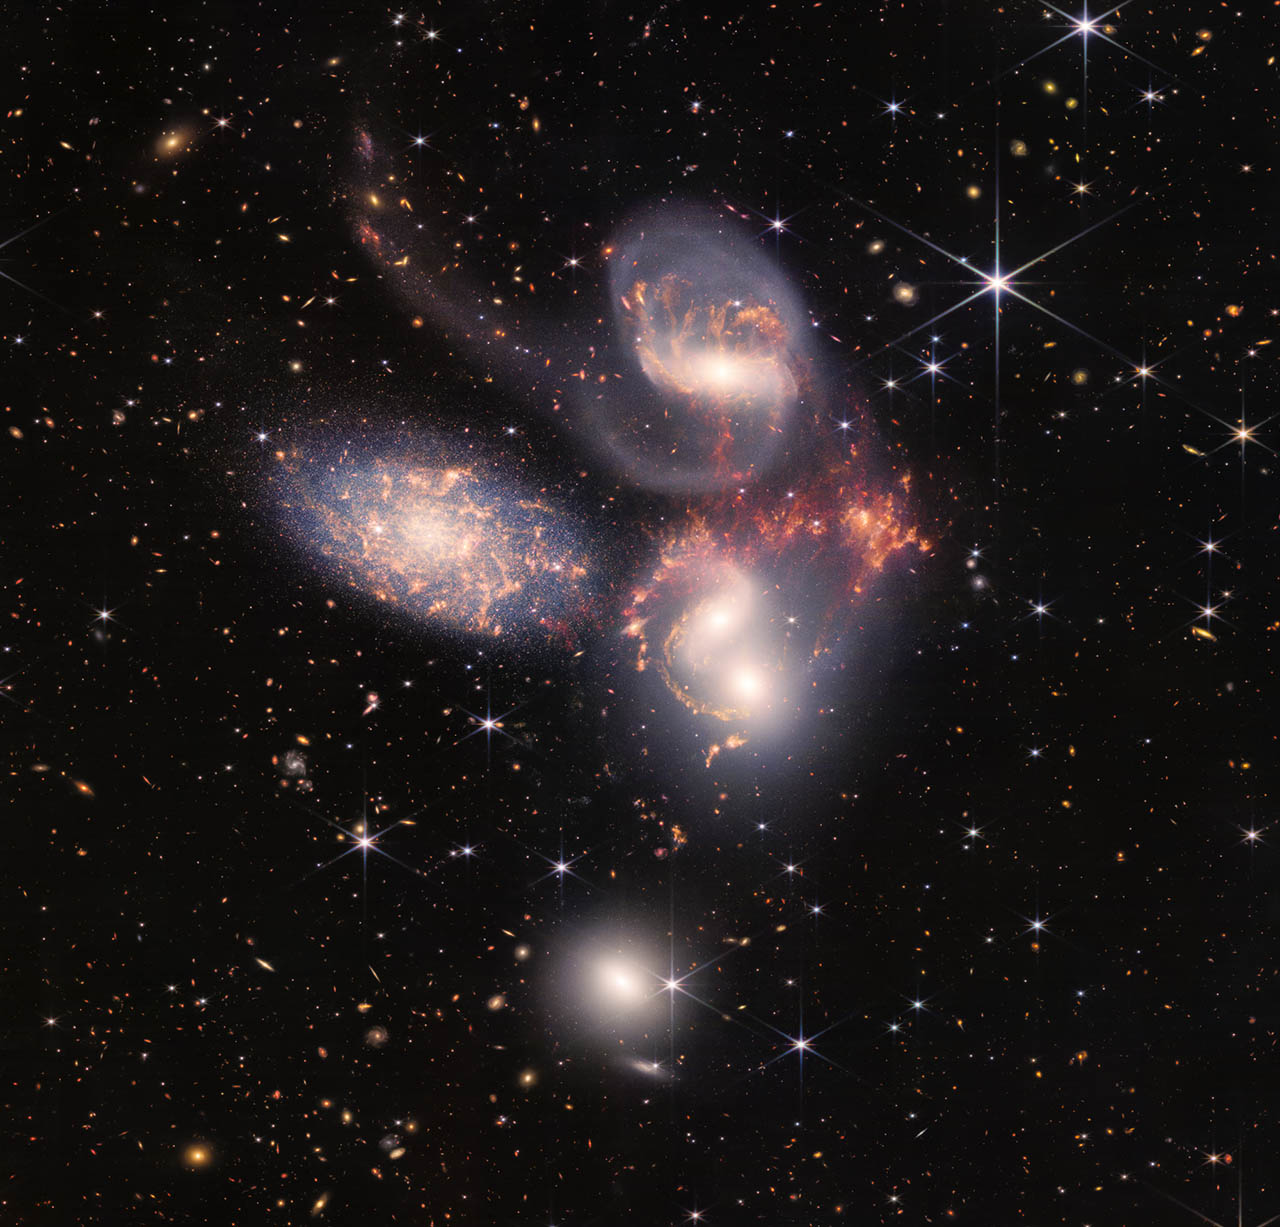 An enormous mosaic of Stephan’s Quintet is the largest image to date from NASA’s James Webb Space Telescope, covering about one-fifth of the Moon’s diameter. It contains over 150 million pixels and is constructed from almost 1,000 separate image files.